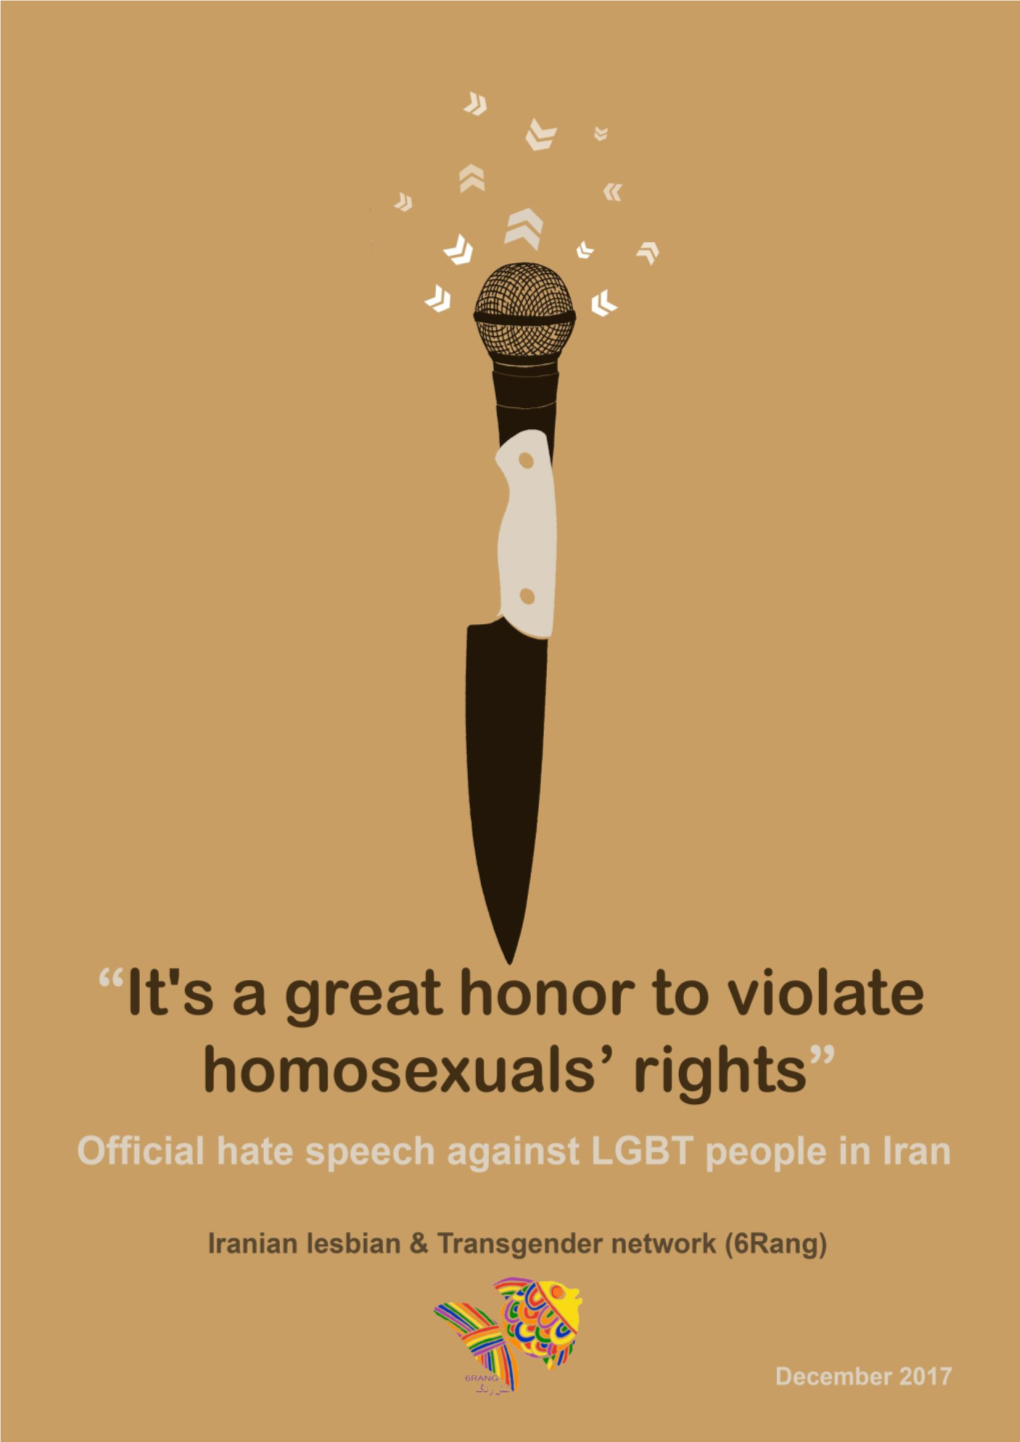 'It's a Great Honor to Violate Homosexuals' Rights': Official Hate Speech Against LGBT People in Iran